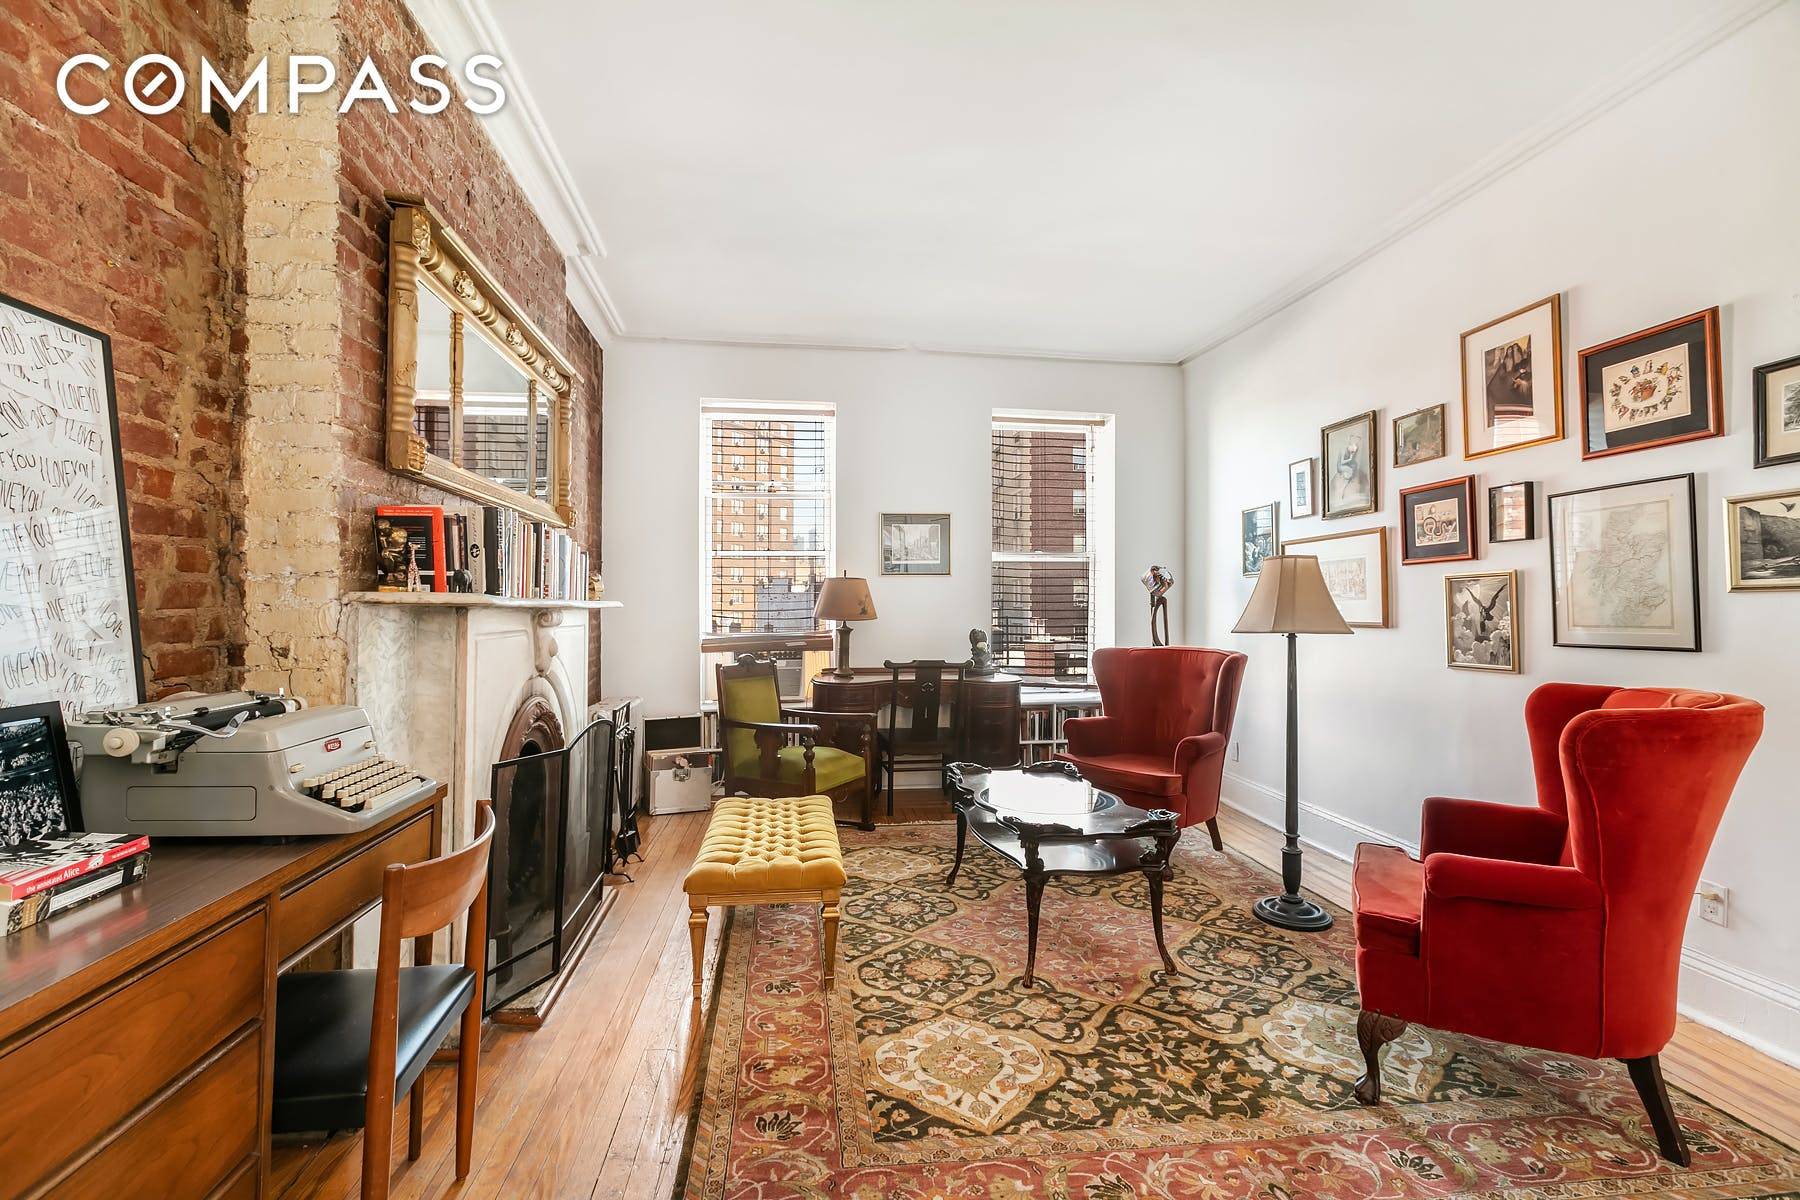 Rarely available Jane Street Gem with original details and tons of West Village charm !